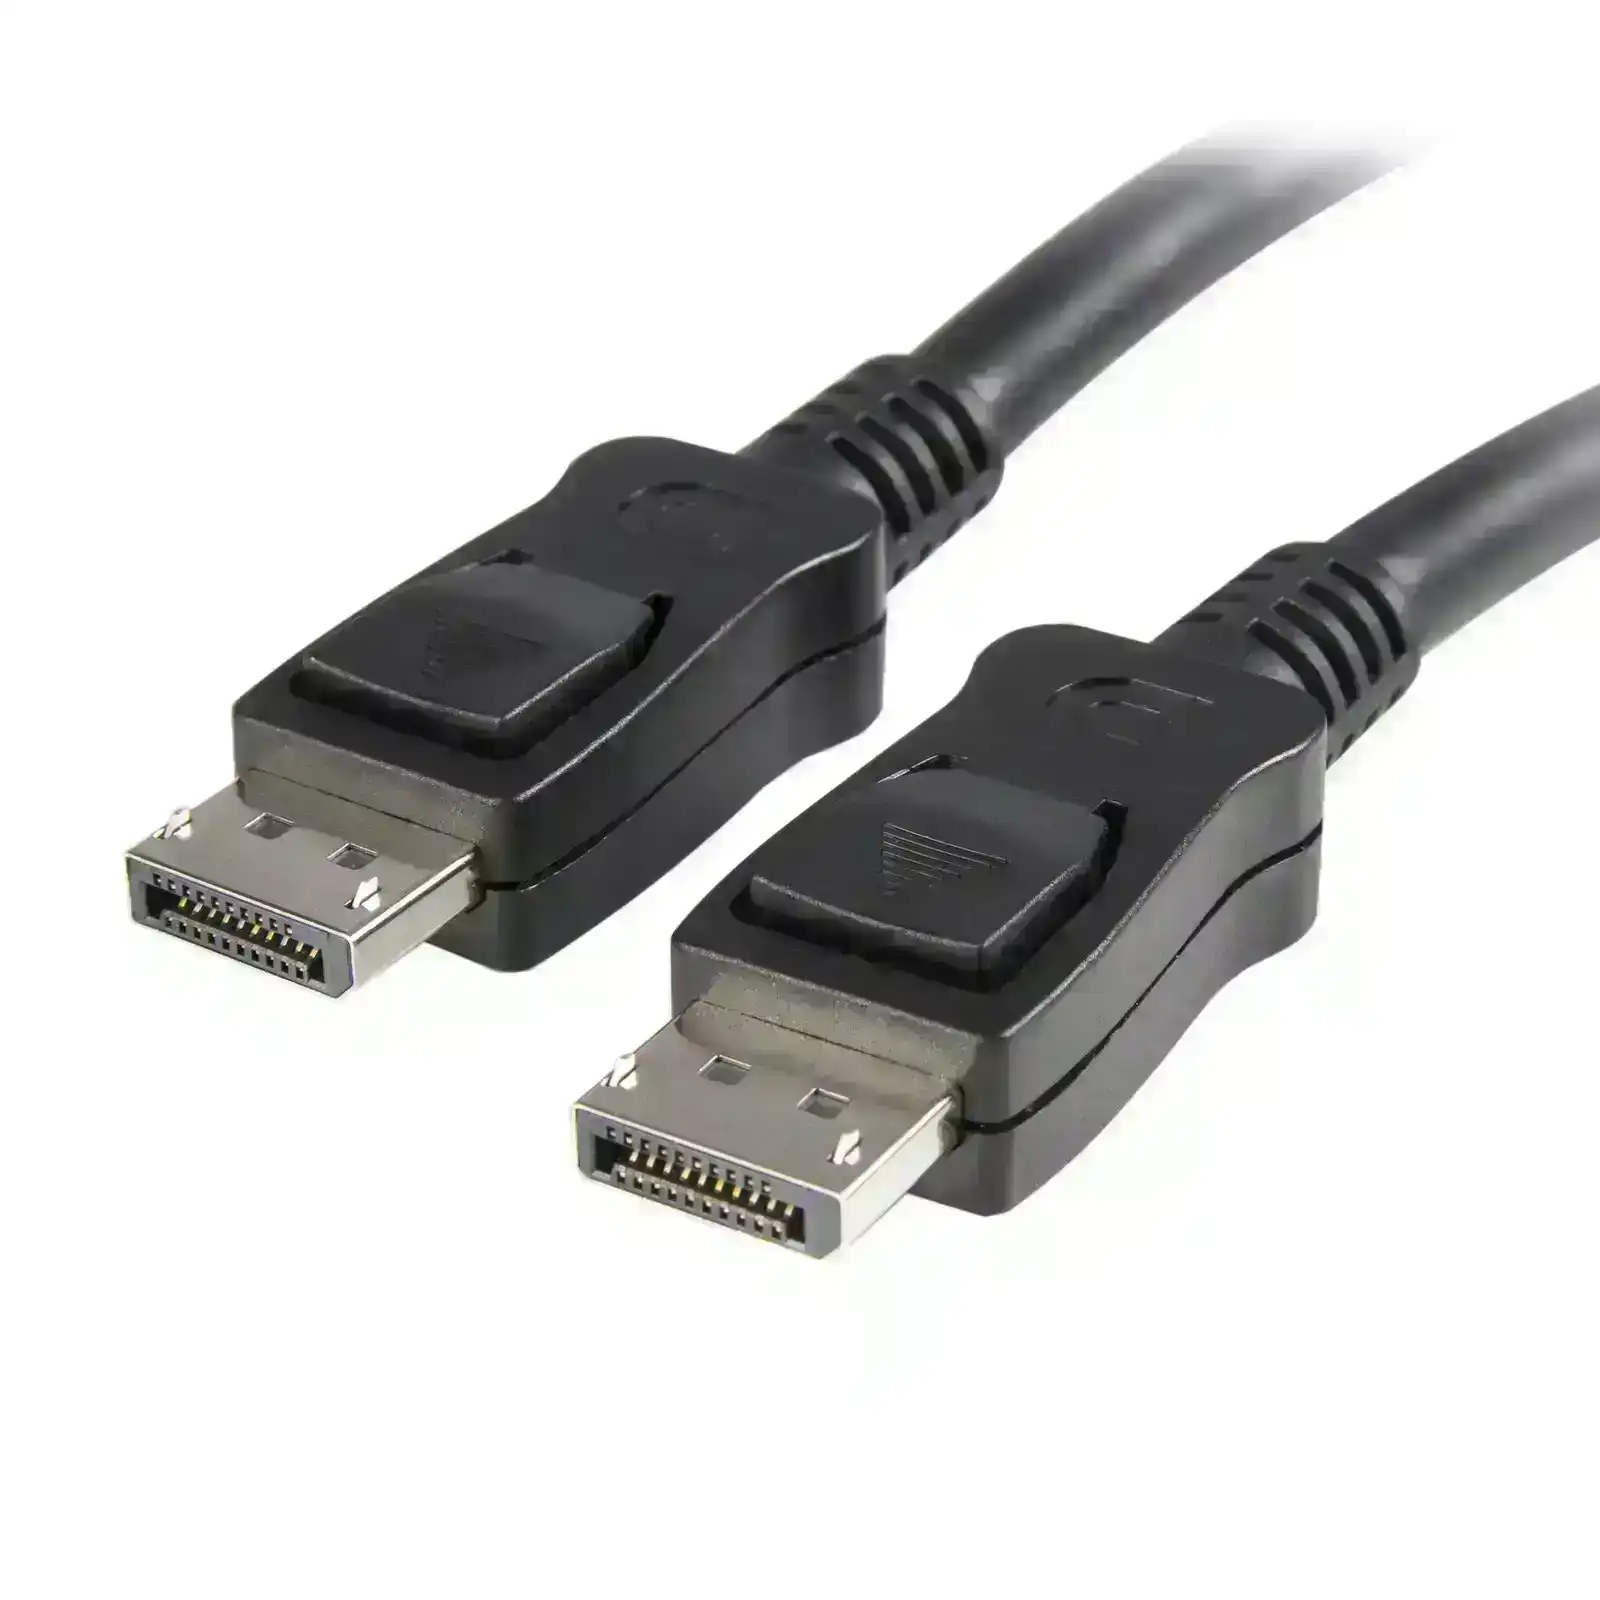 Star Tech DisplayPort Cable 2m Male To Male 4k x 2k/60Hz For PC/Monitors/Laptops